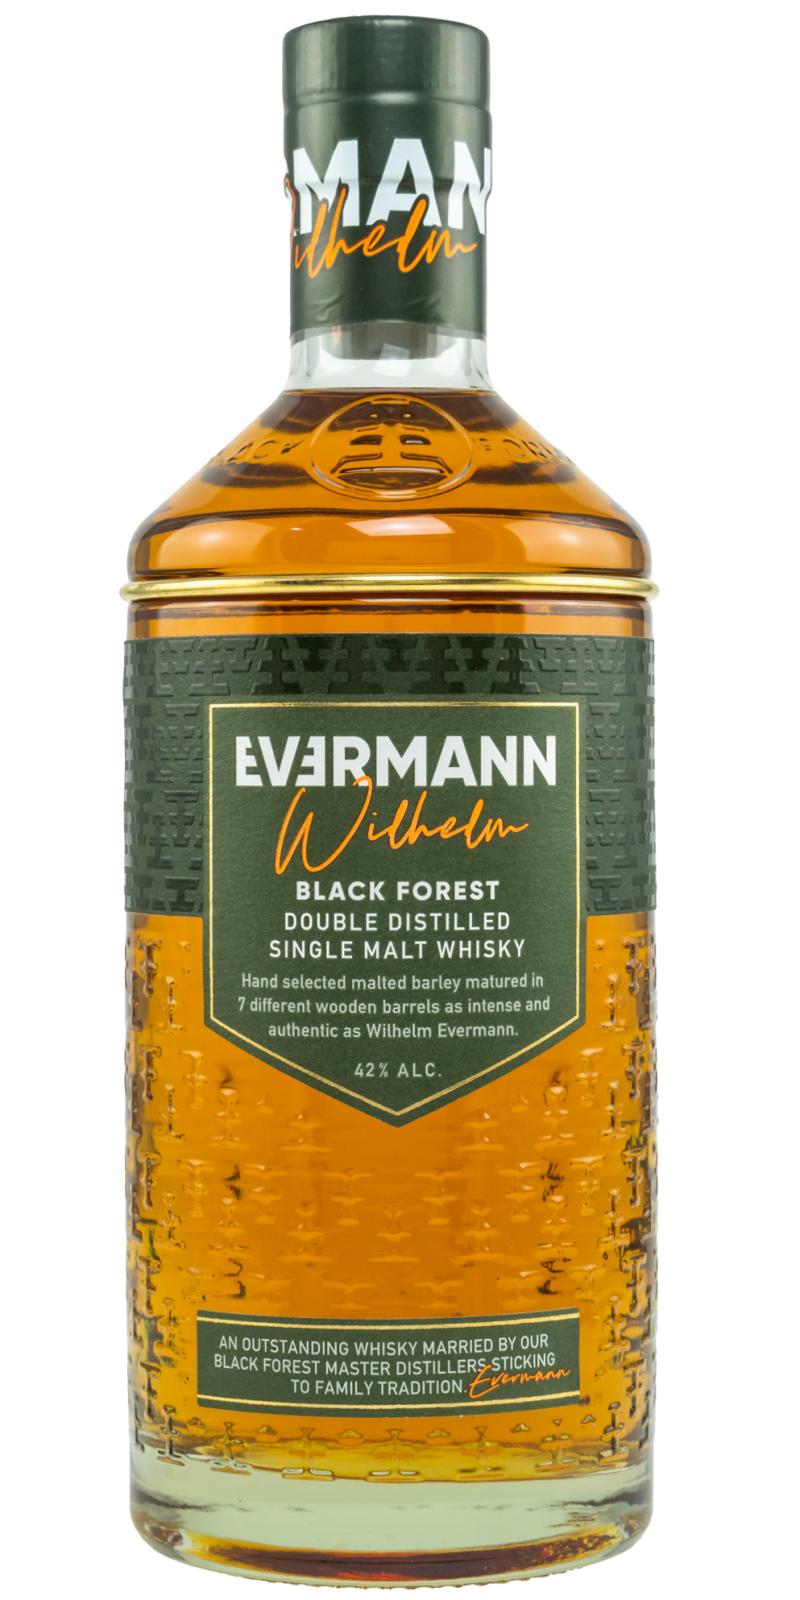 Evermann - Whiskybase Wilhelm and reviews - Ratings